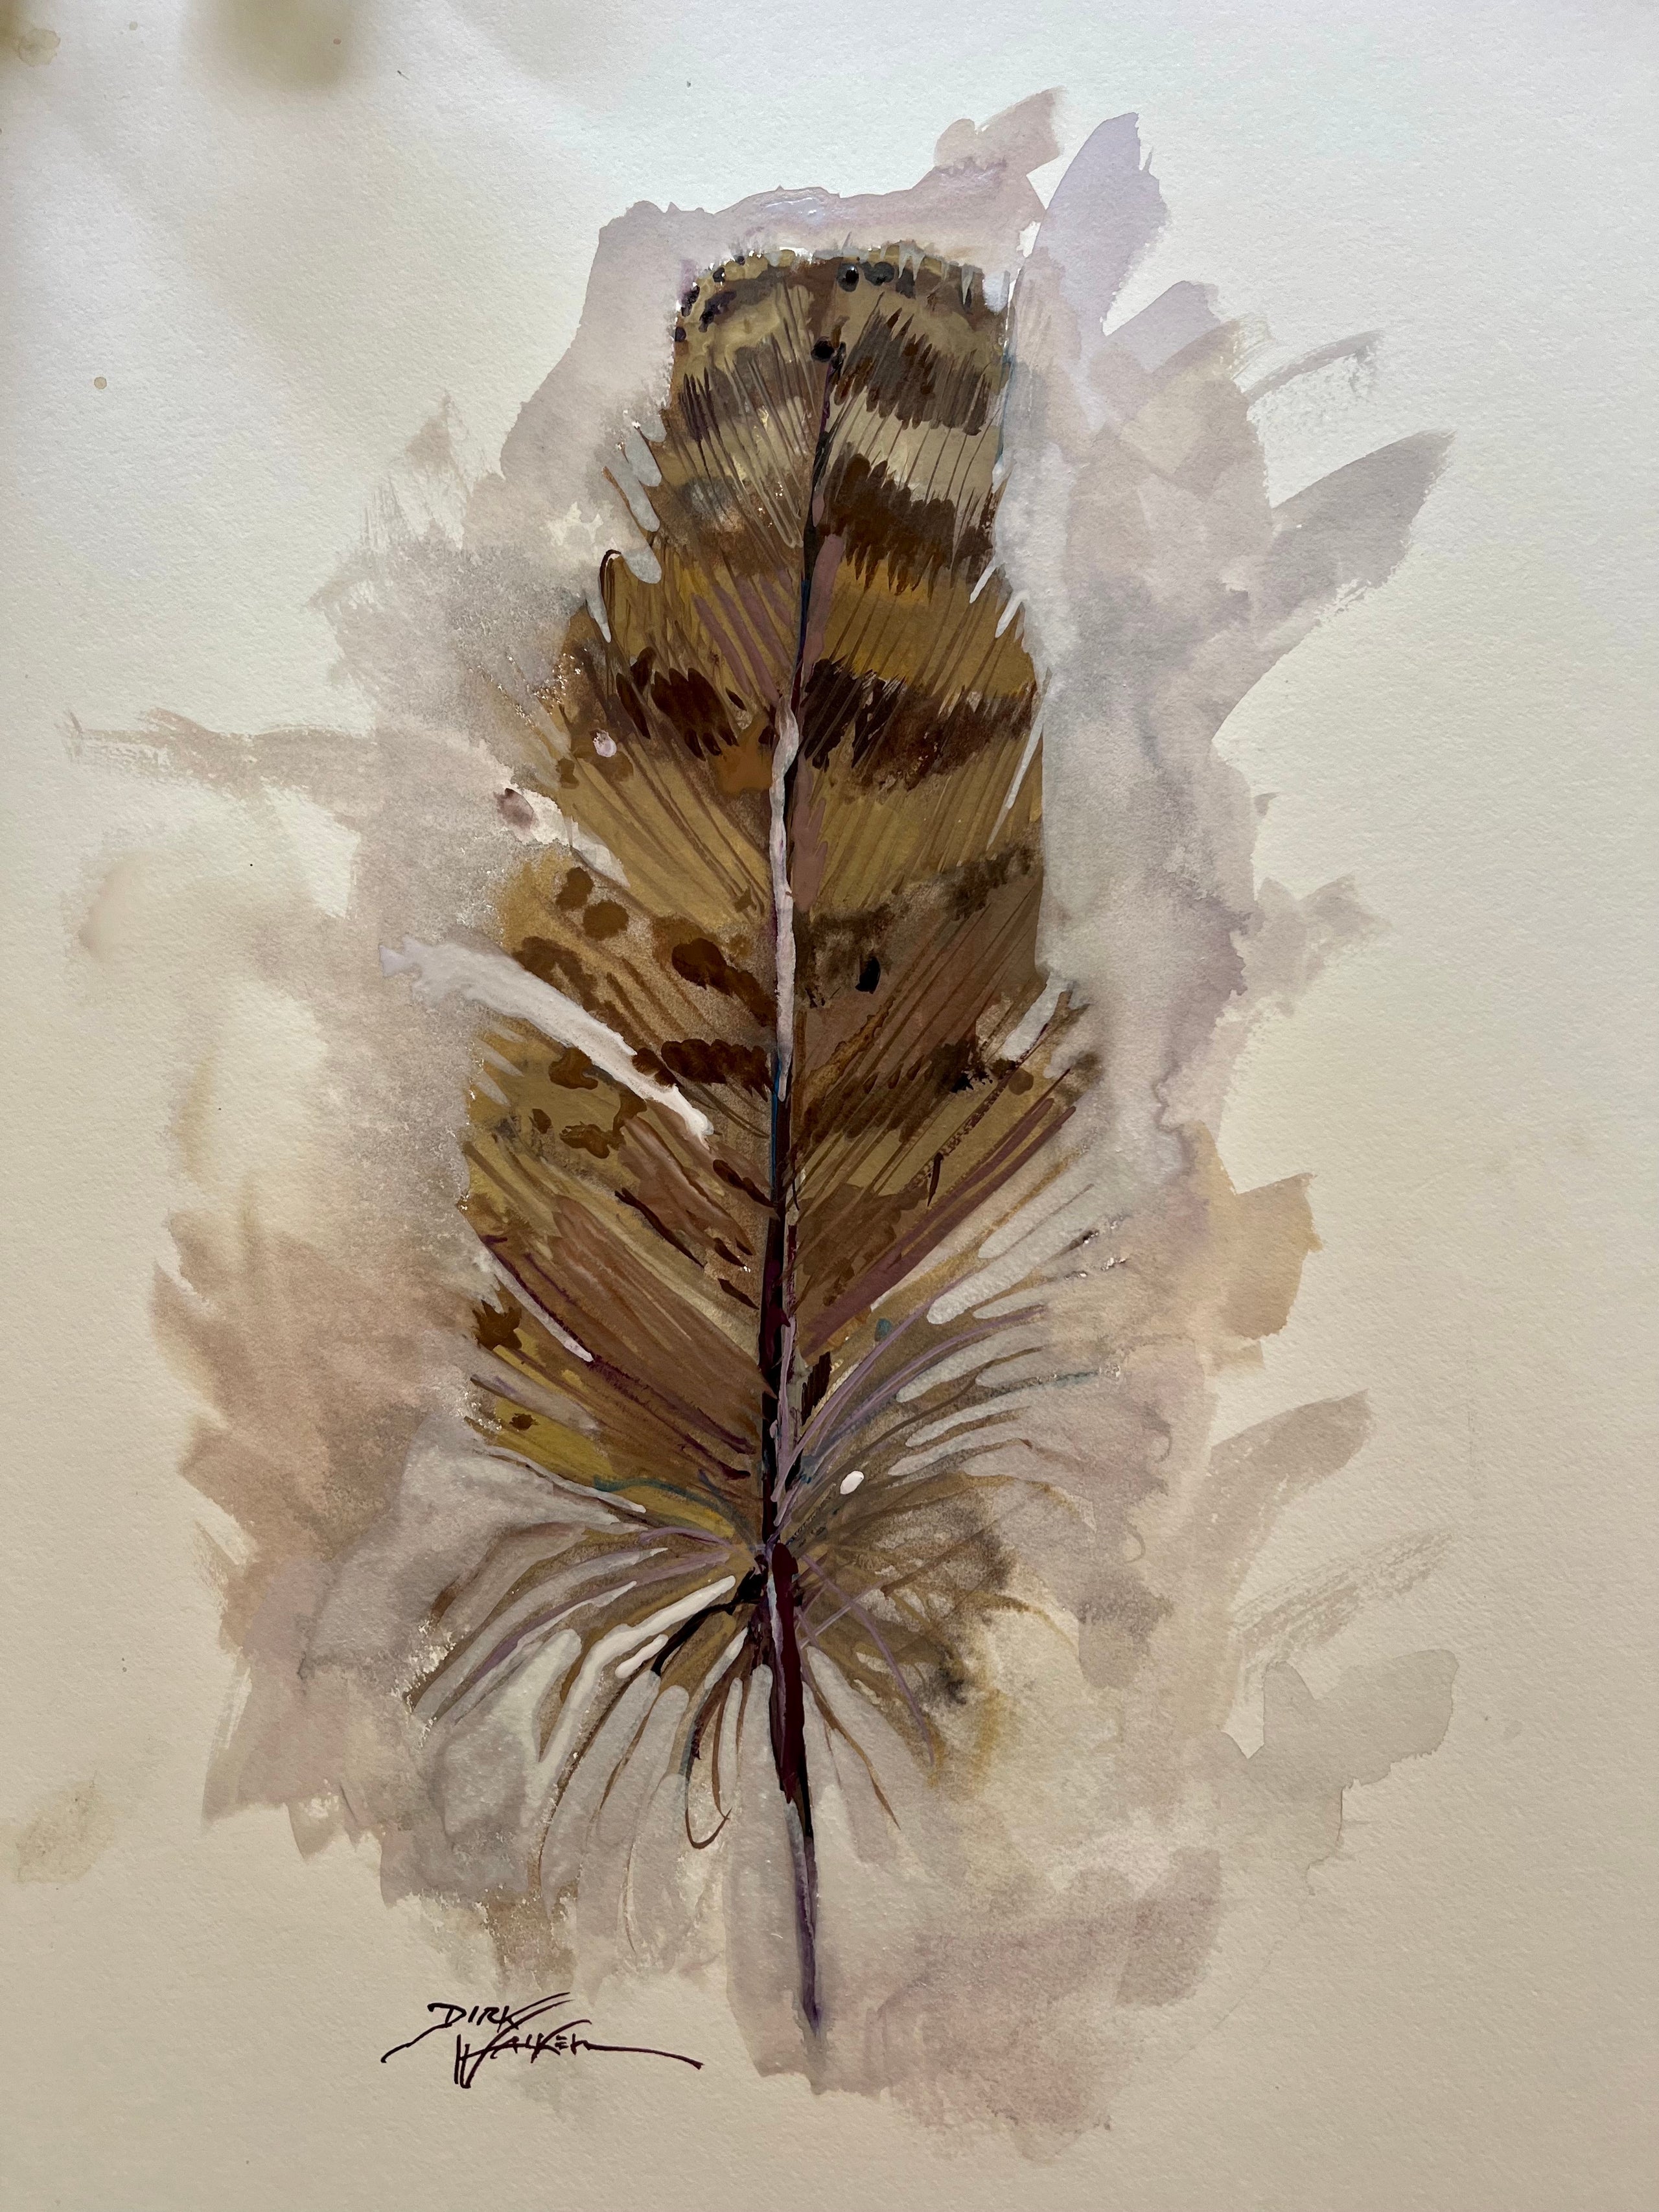 pheasant feather by Starrystock on DeviantArt